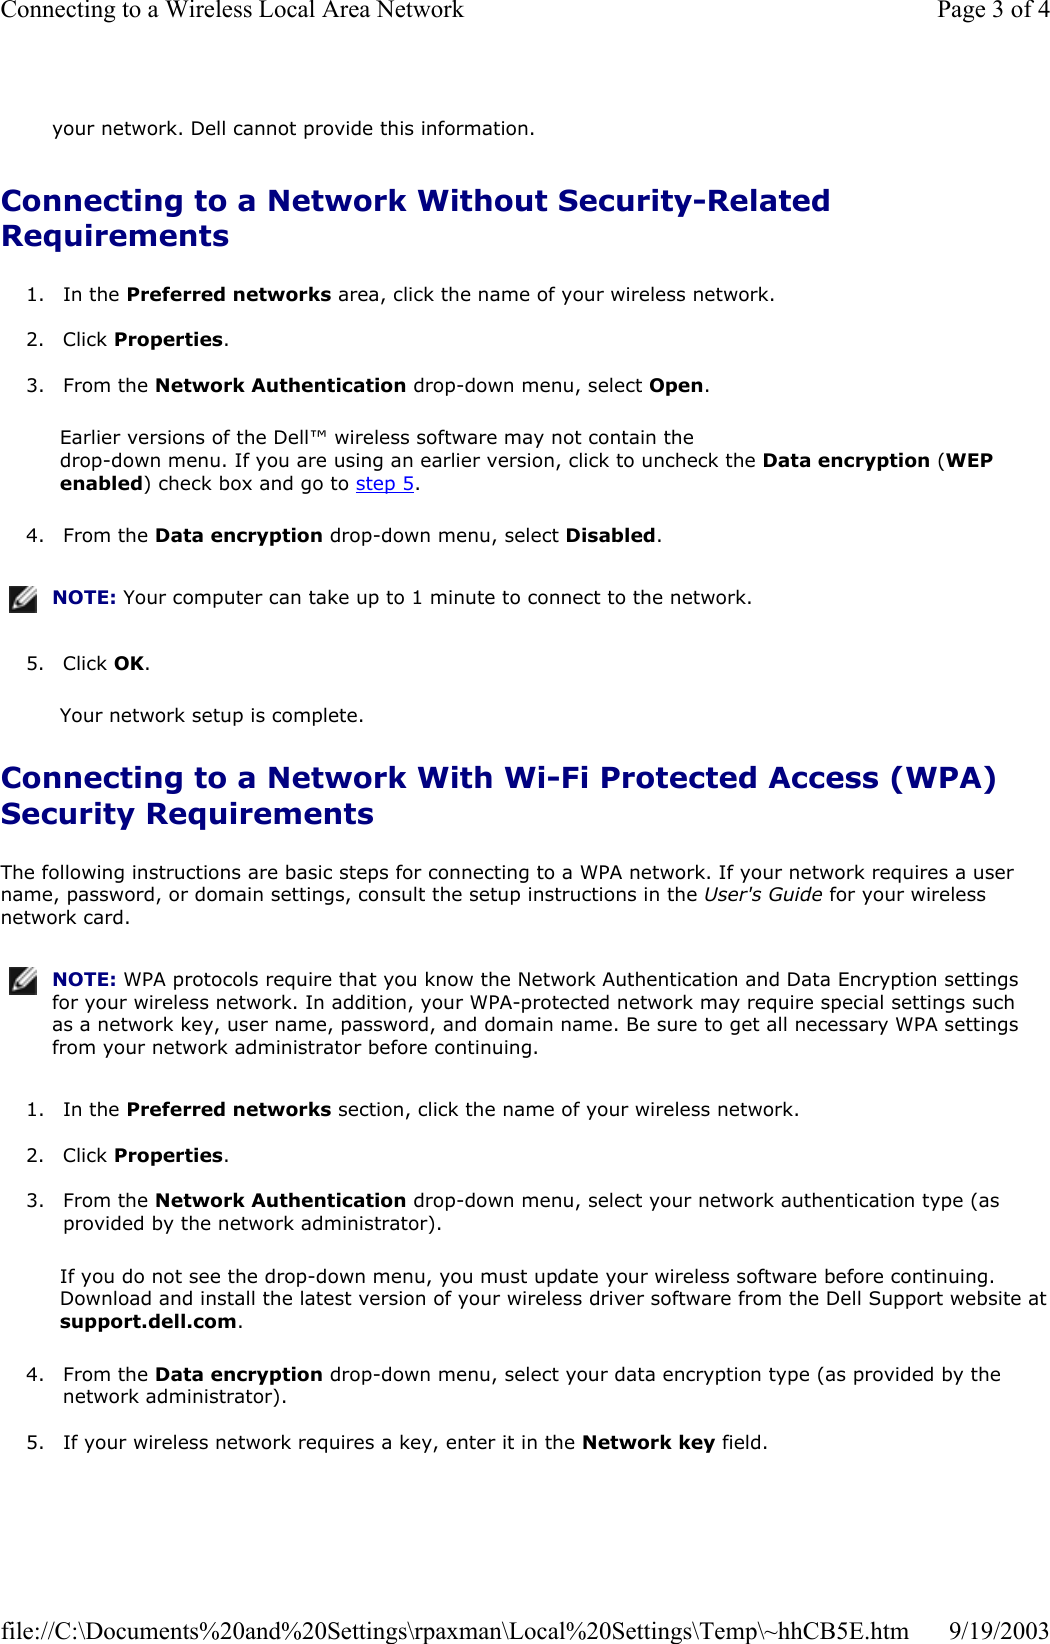 Connecting to a Network Without Security-Related Requirements 1. In the Preferred networks area, click the name of your wireless network.   2. Click Properties.   3. From the Network Authentication drop-down menu, select Open.  Earlier versions of the Dell™ wireless software may not contain the  drop-down menu. If you are using an earlier version, click to uncheck the Data encryption (WEP enabled) check box and go to step 5. 4. From the Data encryption drop-down menu, select Disabled.   5. Click OK.  Your network setup is complete. Connecting to a Network With Wi-Fi Protected Access (WPA) Security Requirements The following instructions are basic steps for connecting to a WPA network. If your network requires a user name, password, or domain settings, consult the setup instructions in the User&apos;s Guide for your wireless network card.  1. In the Preferred networks section, click the name of your wireless network.   2. Click Properties.   3. From the Network Authentication drop-down menu, select your network authentication type (as provided by the network administrator).  If you do not see the drop-down menu, you must update your wireless software before continuing. Download and install the latest version of your wireless driver software from the Dell Support website at support.dell.com. 4. From the Data encryption drop-down menu, select your data encryption type (as provided by the network administrator).   5. If your wireless network requires a key, enter it in the Network key field.   your network. Dell cannot provide this information.NOTE: Your computer can take up to 1 minute to connect to the network.NOTE: WPA protocols require that you know the Network Authentication and Data Encryption settings for your wireless network. In addition, your WPA-protected network may require special settings such as a network key, user name, password, and domain name. Be sure to get all necessary WPA settings from your network administrator before continuing.Page 3 of 4Connecting to a Wireless Local Area Network9/19/2003file://C:\Documents%20and%20Settings\rpaxman\Local%20Settings\Temp\~hhCB5E.htm